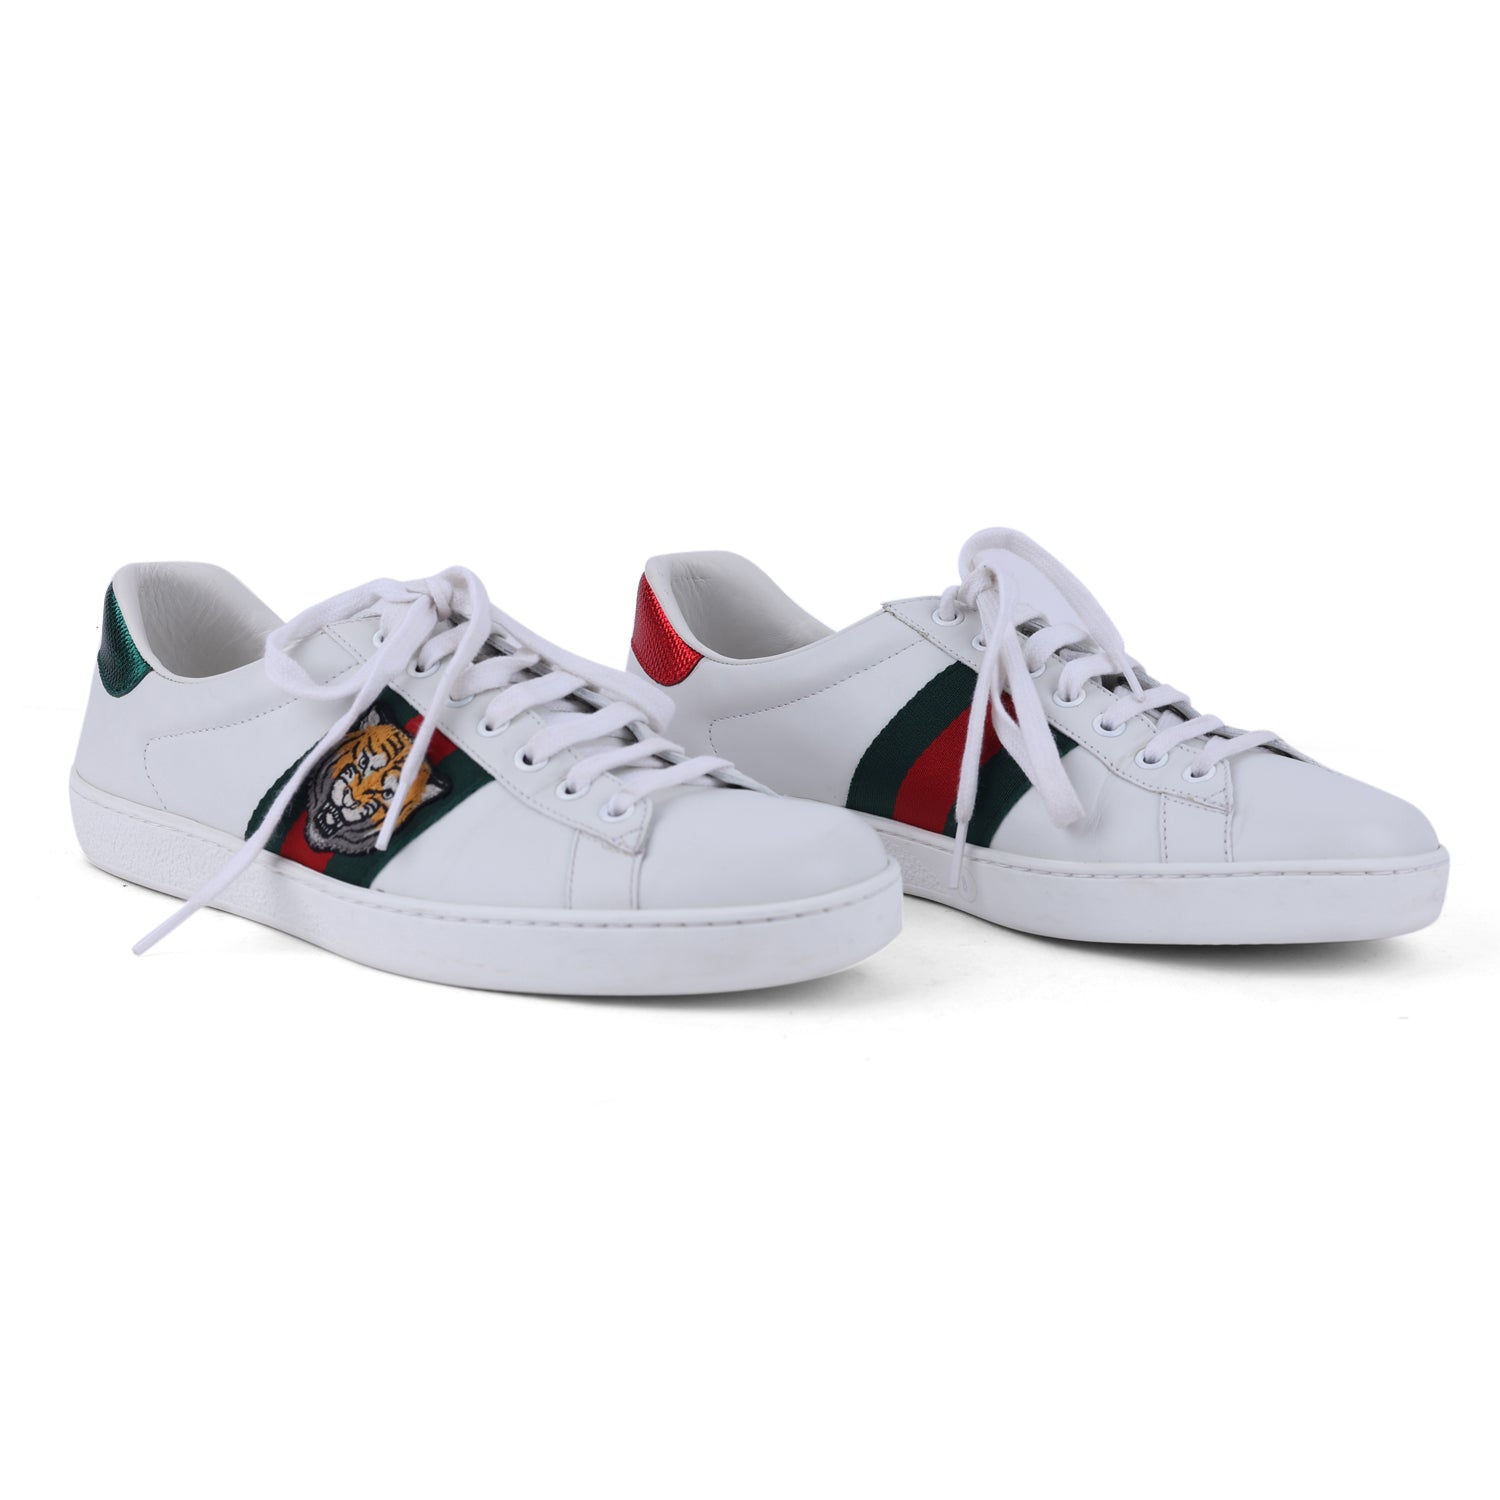 Gucci Leather Ace Embroidered Tiger Low Top Sneakers